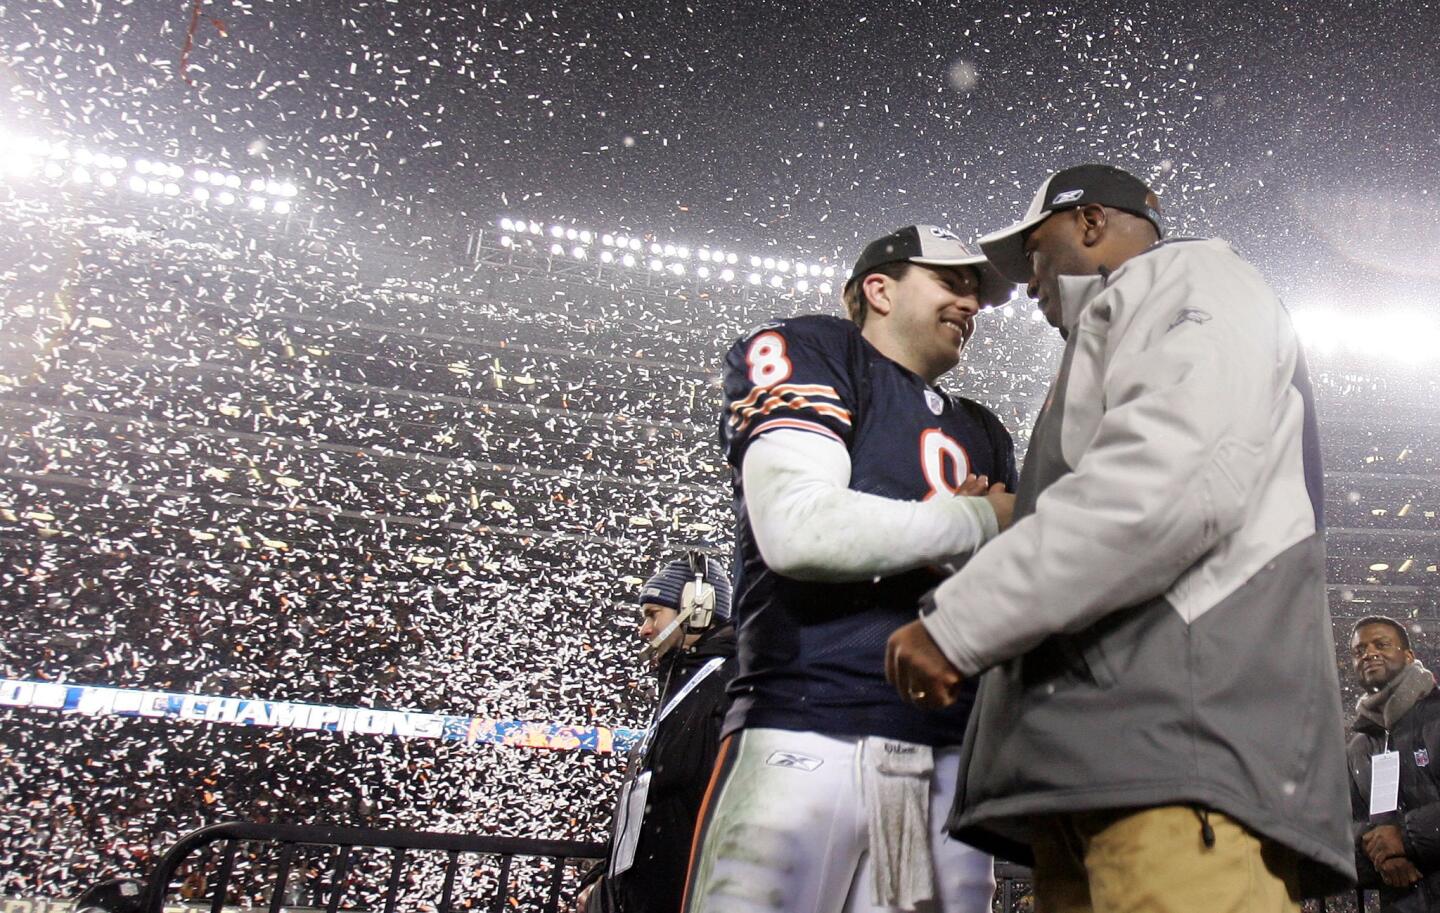 Quarterback Rex Grossman and head coach Lovie Smith celebrate after the Bears 39-14 win against the Saints during the NFC Championship game at Soldier Field on January 21, 2007.